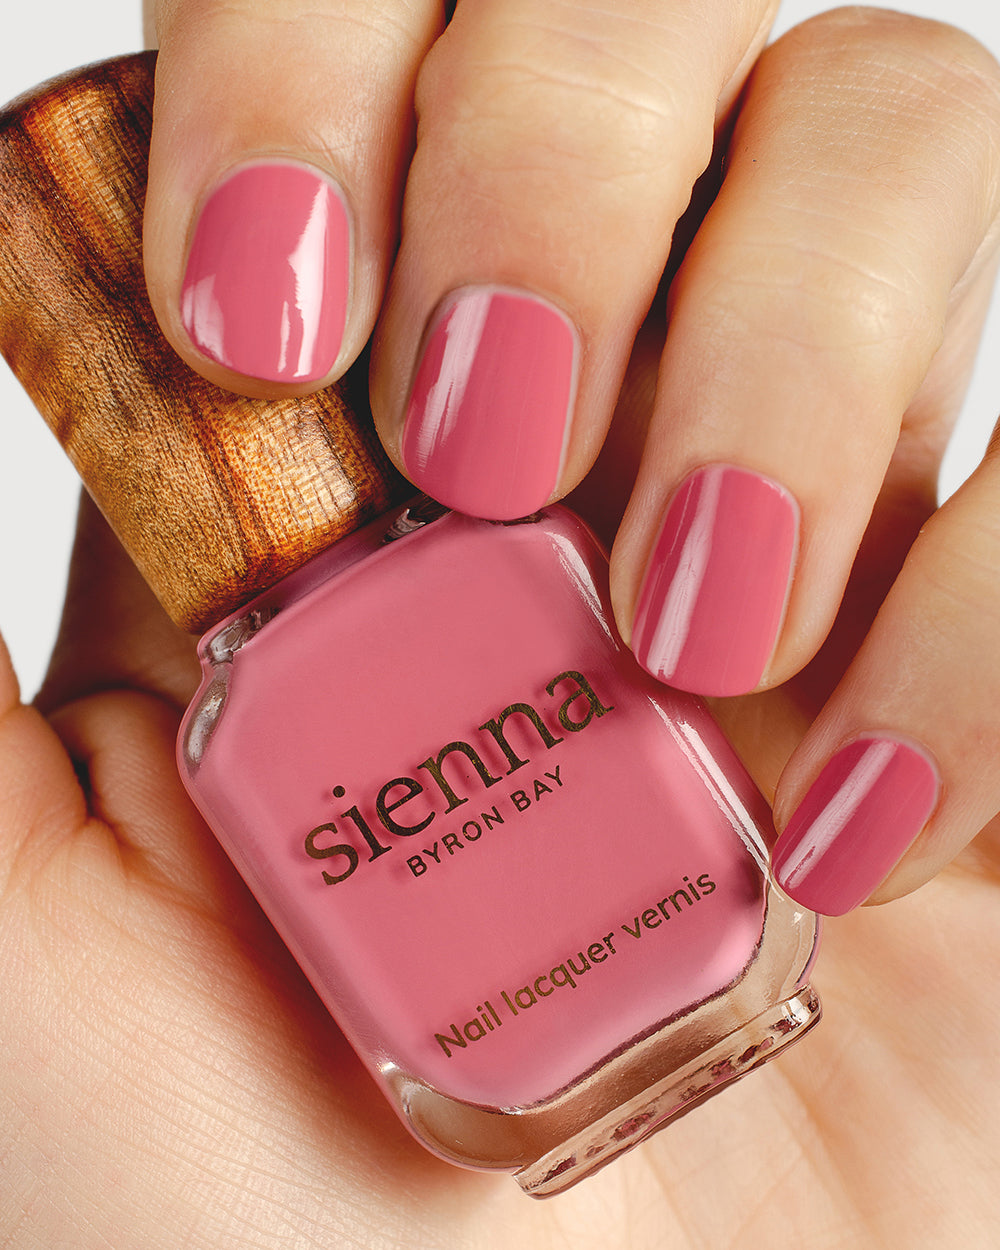 midtone pink nail polish hand swatch on fair skin tone holding a sienna bottle up close